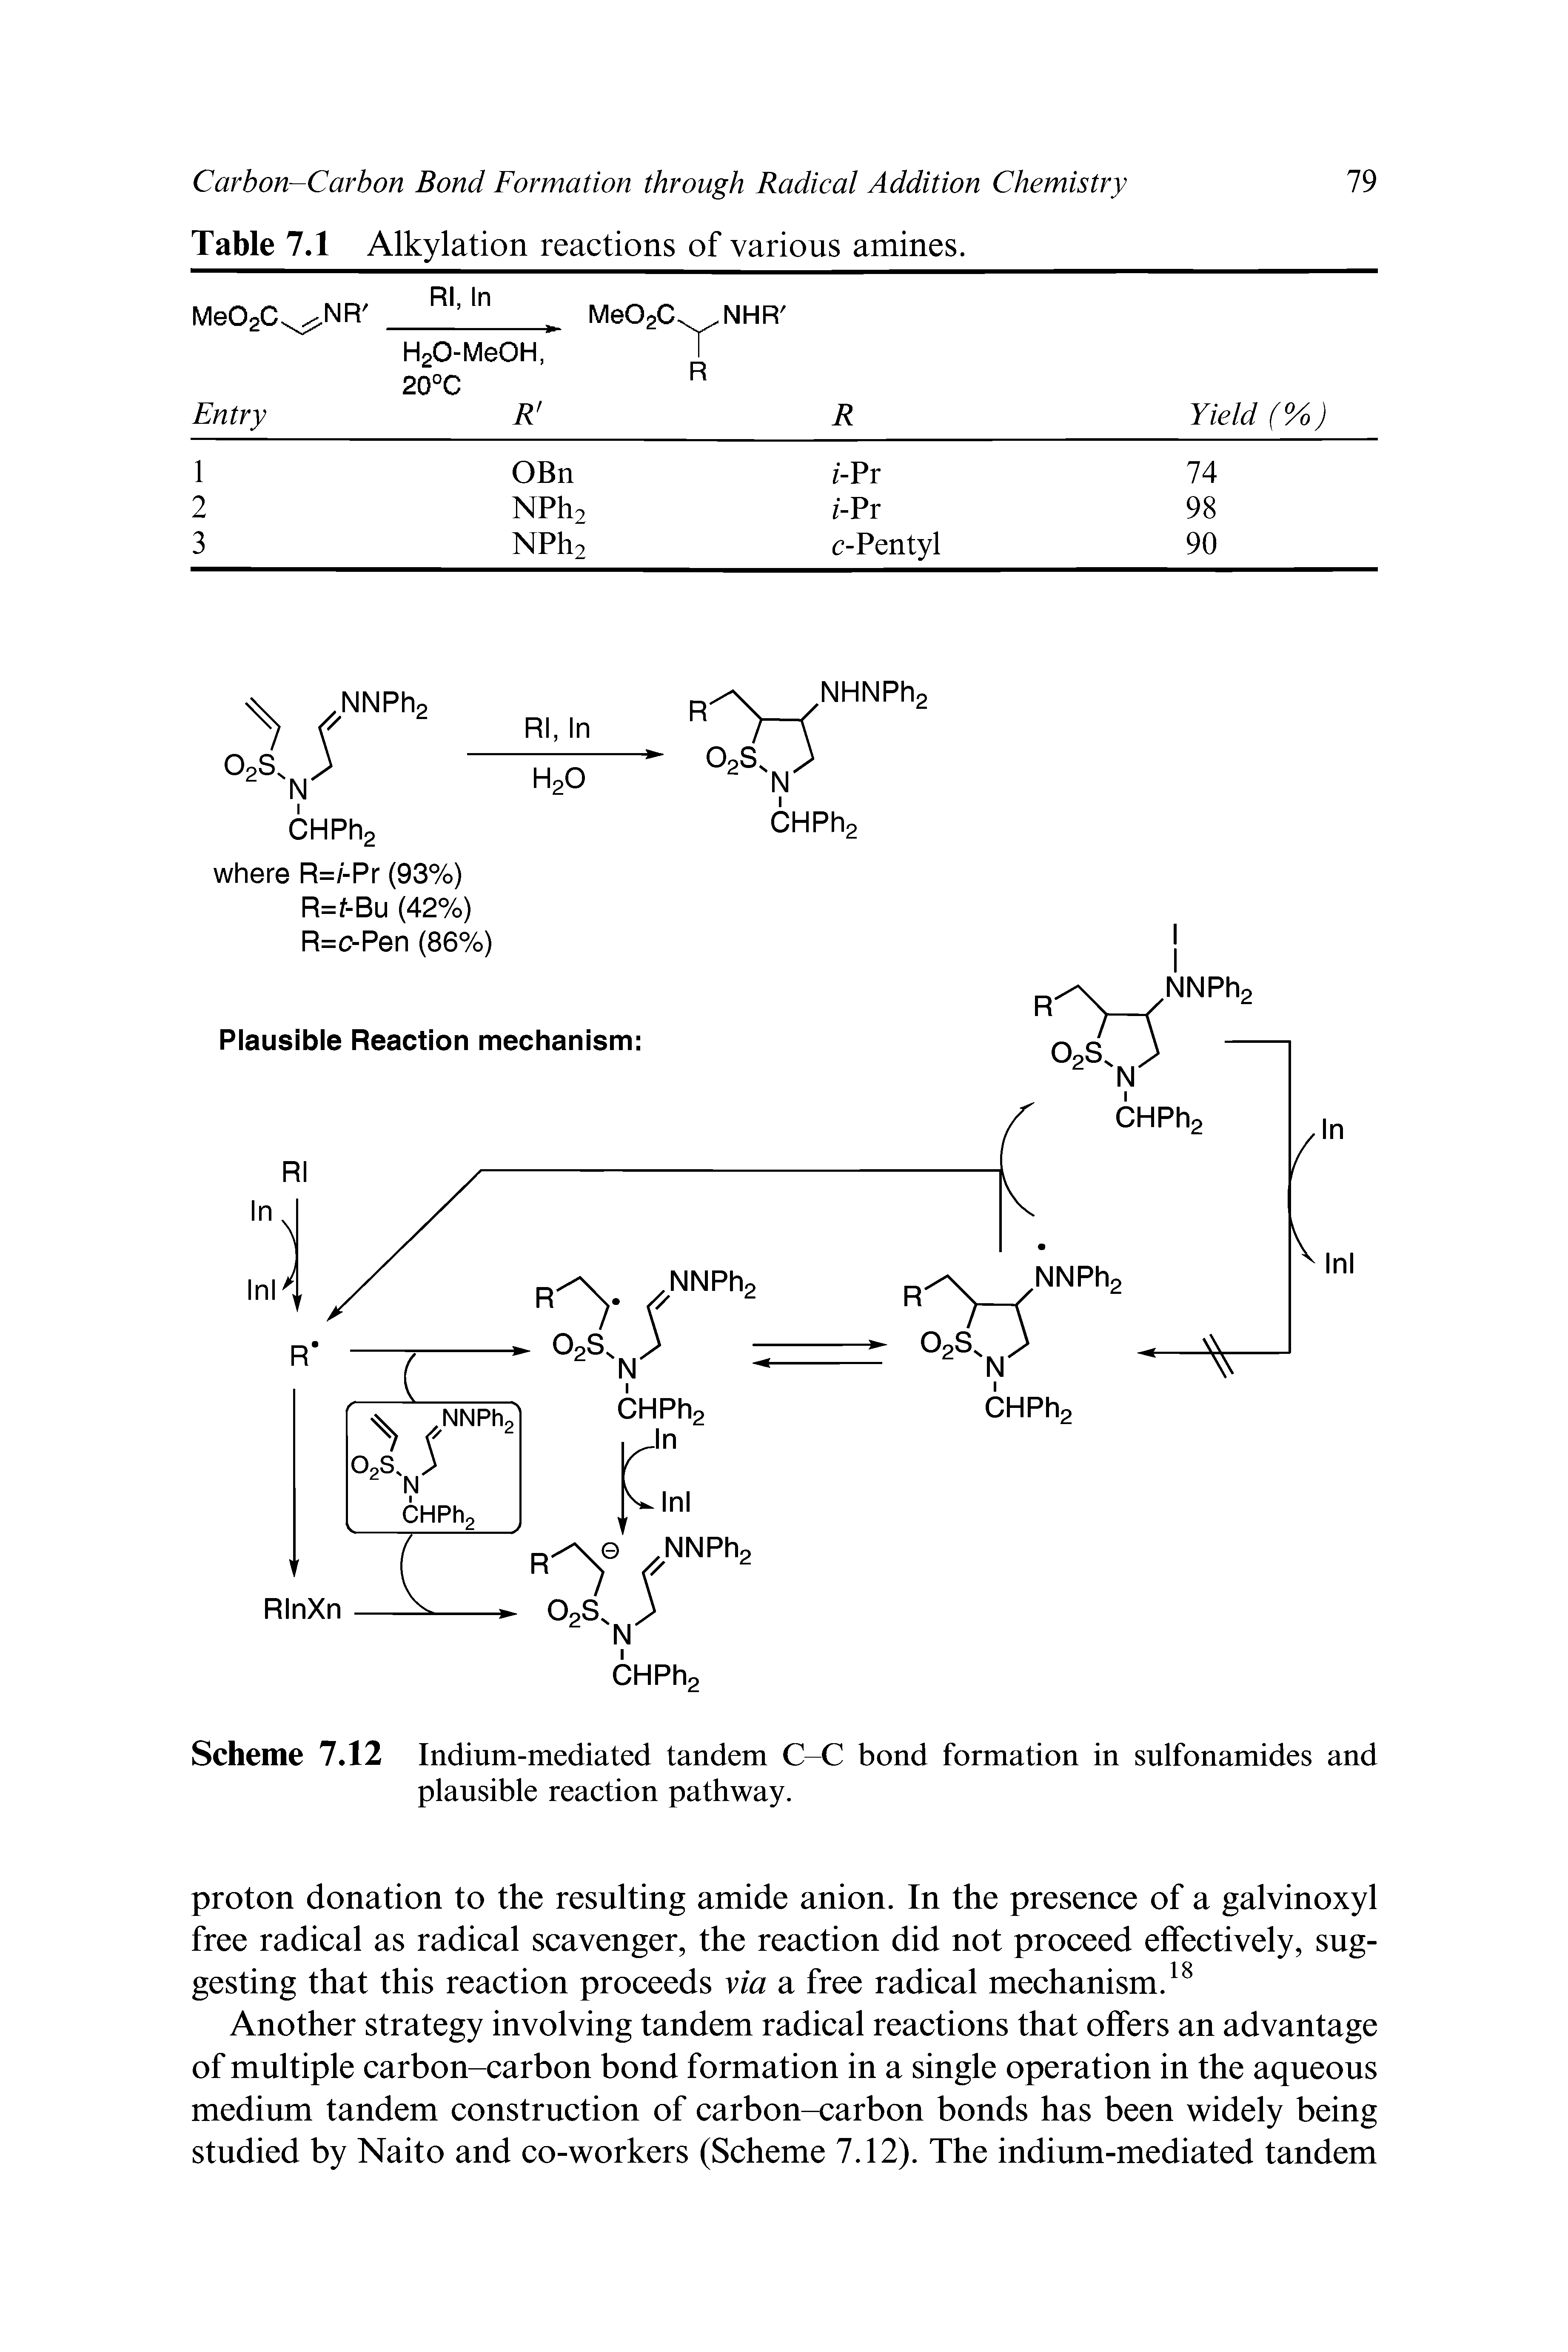 Scheme 7.12 Indium-mediated tandem C-C bond formation in sulfonamides and plausible reaction pathway.